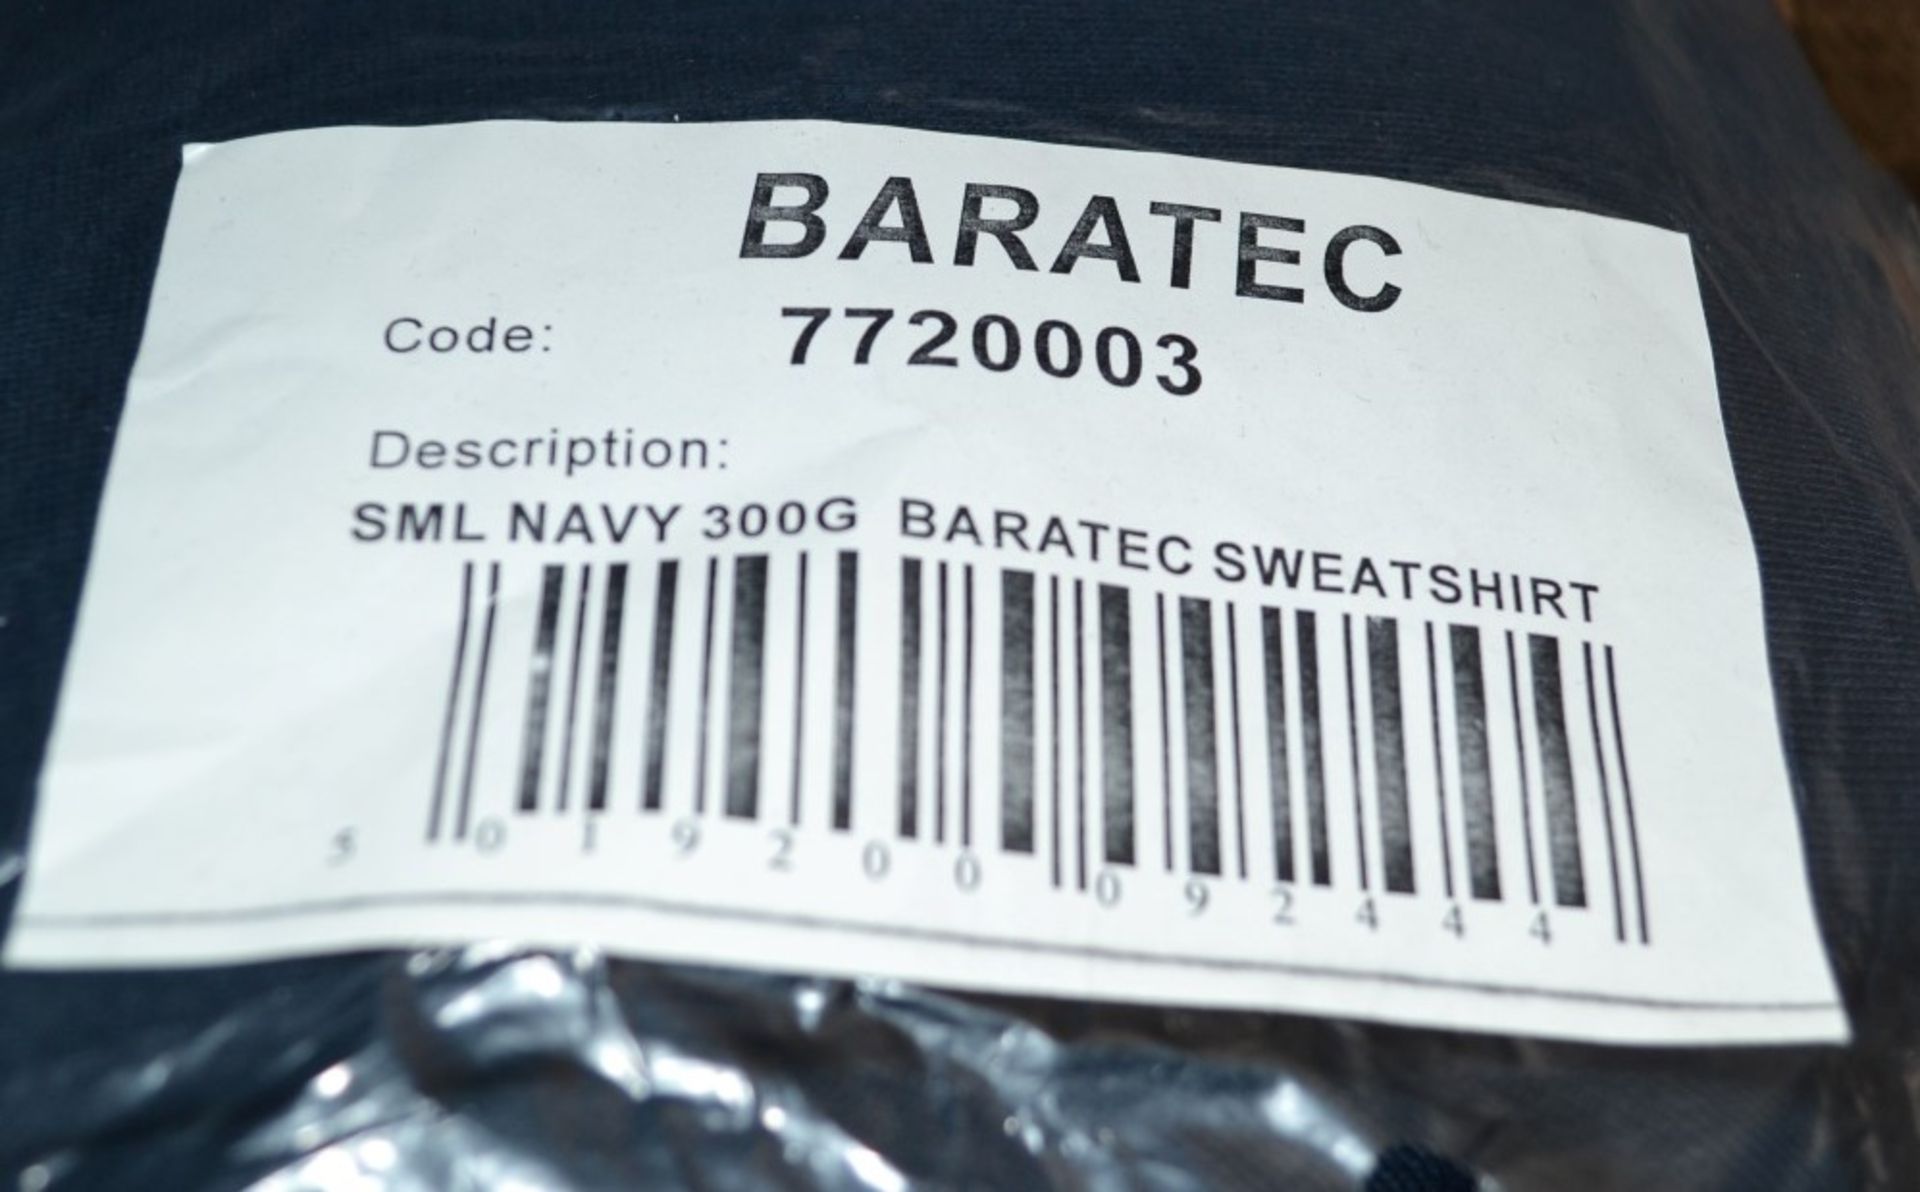 4 x Assorted Baratec Sweatshirts - Various sizes - 2 Colours: Black / Navy - Various Sizes - New/ - Image 2 of 2